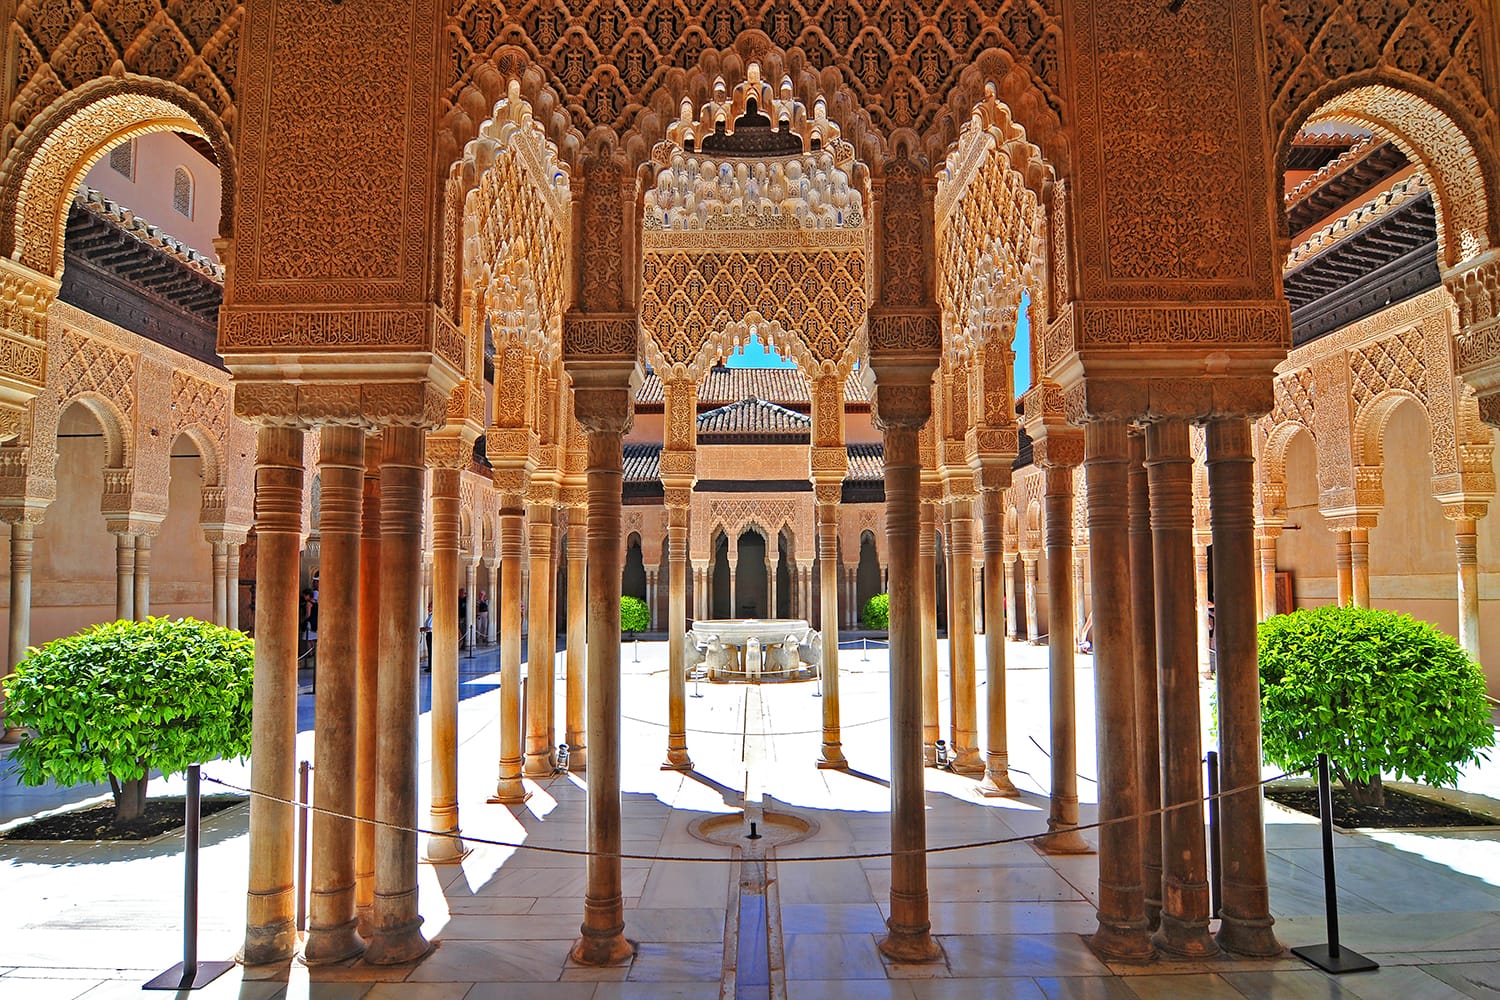 Moorish architecture of the Court of the Lions, the Alhambra, Granada, Andalucia (Andalusia), Spain